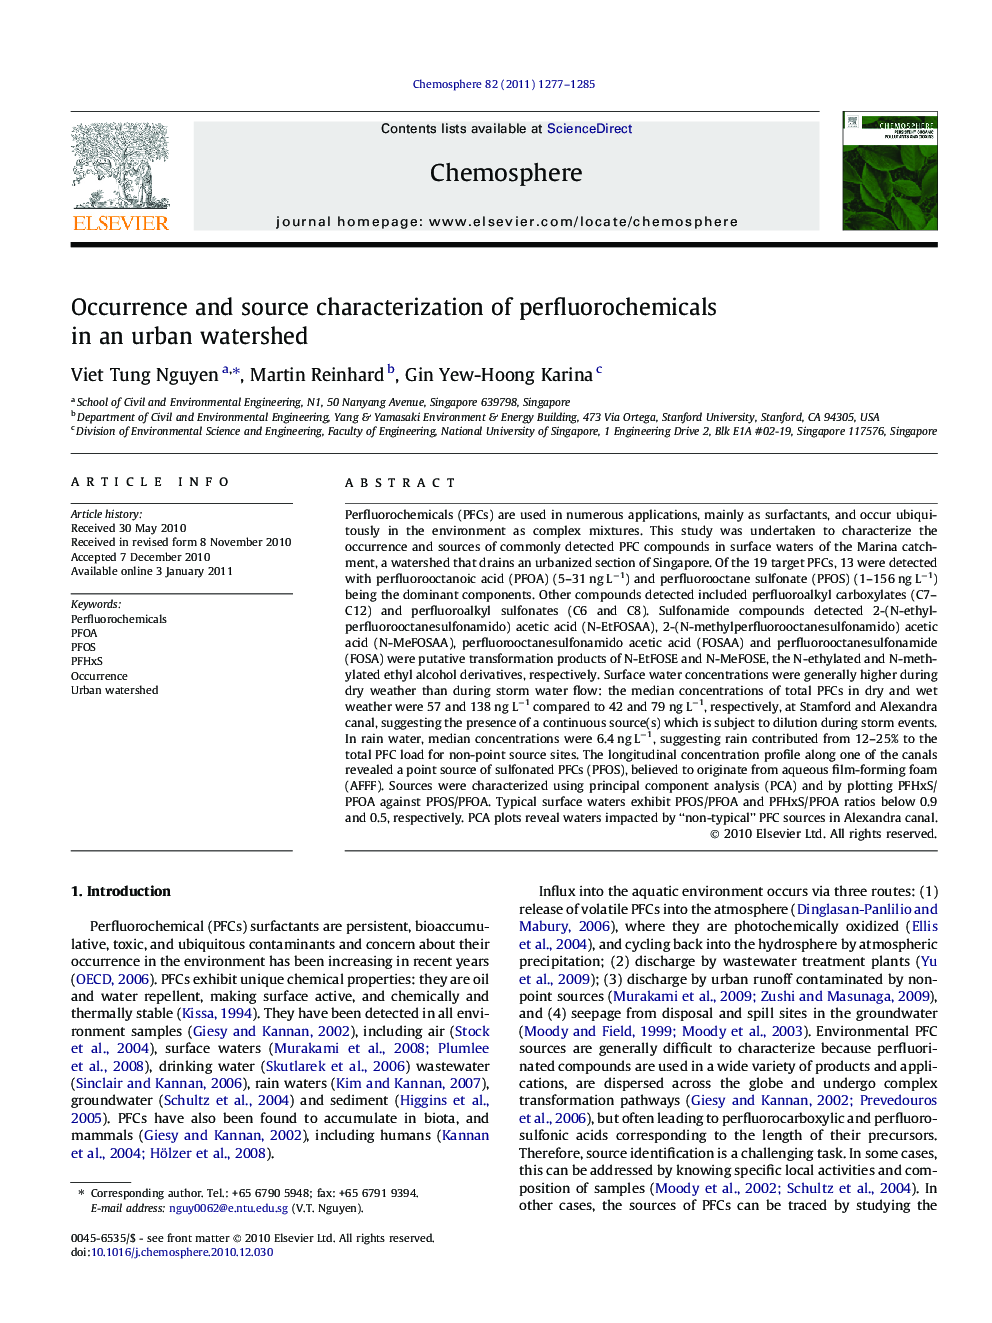 Occurrence and source characterization of perfluorochemicals in an urban watershed